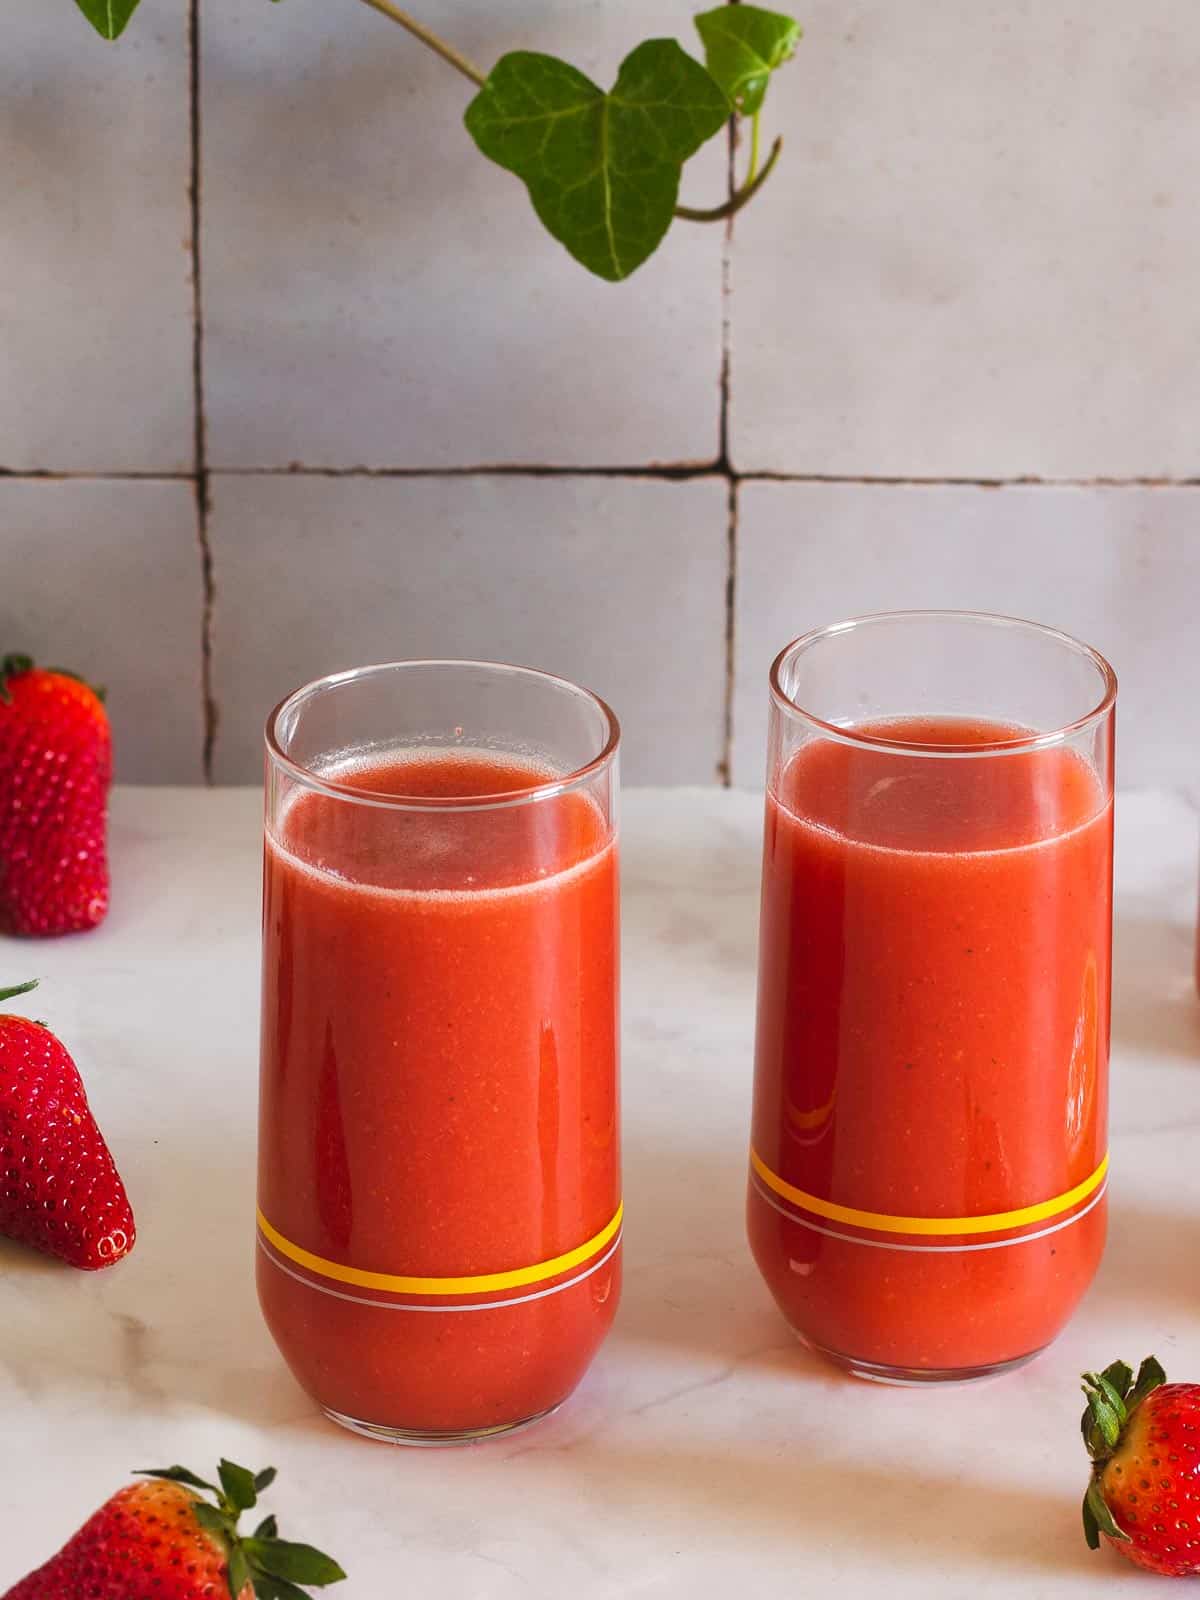 serve your fresh pure strawberry juice